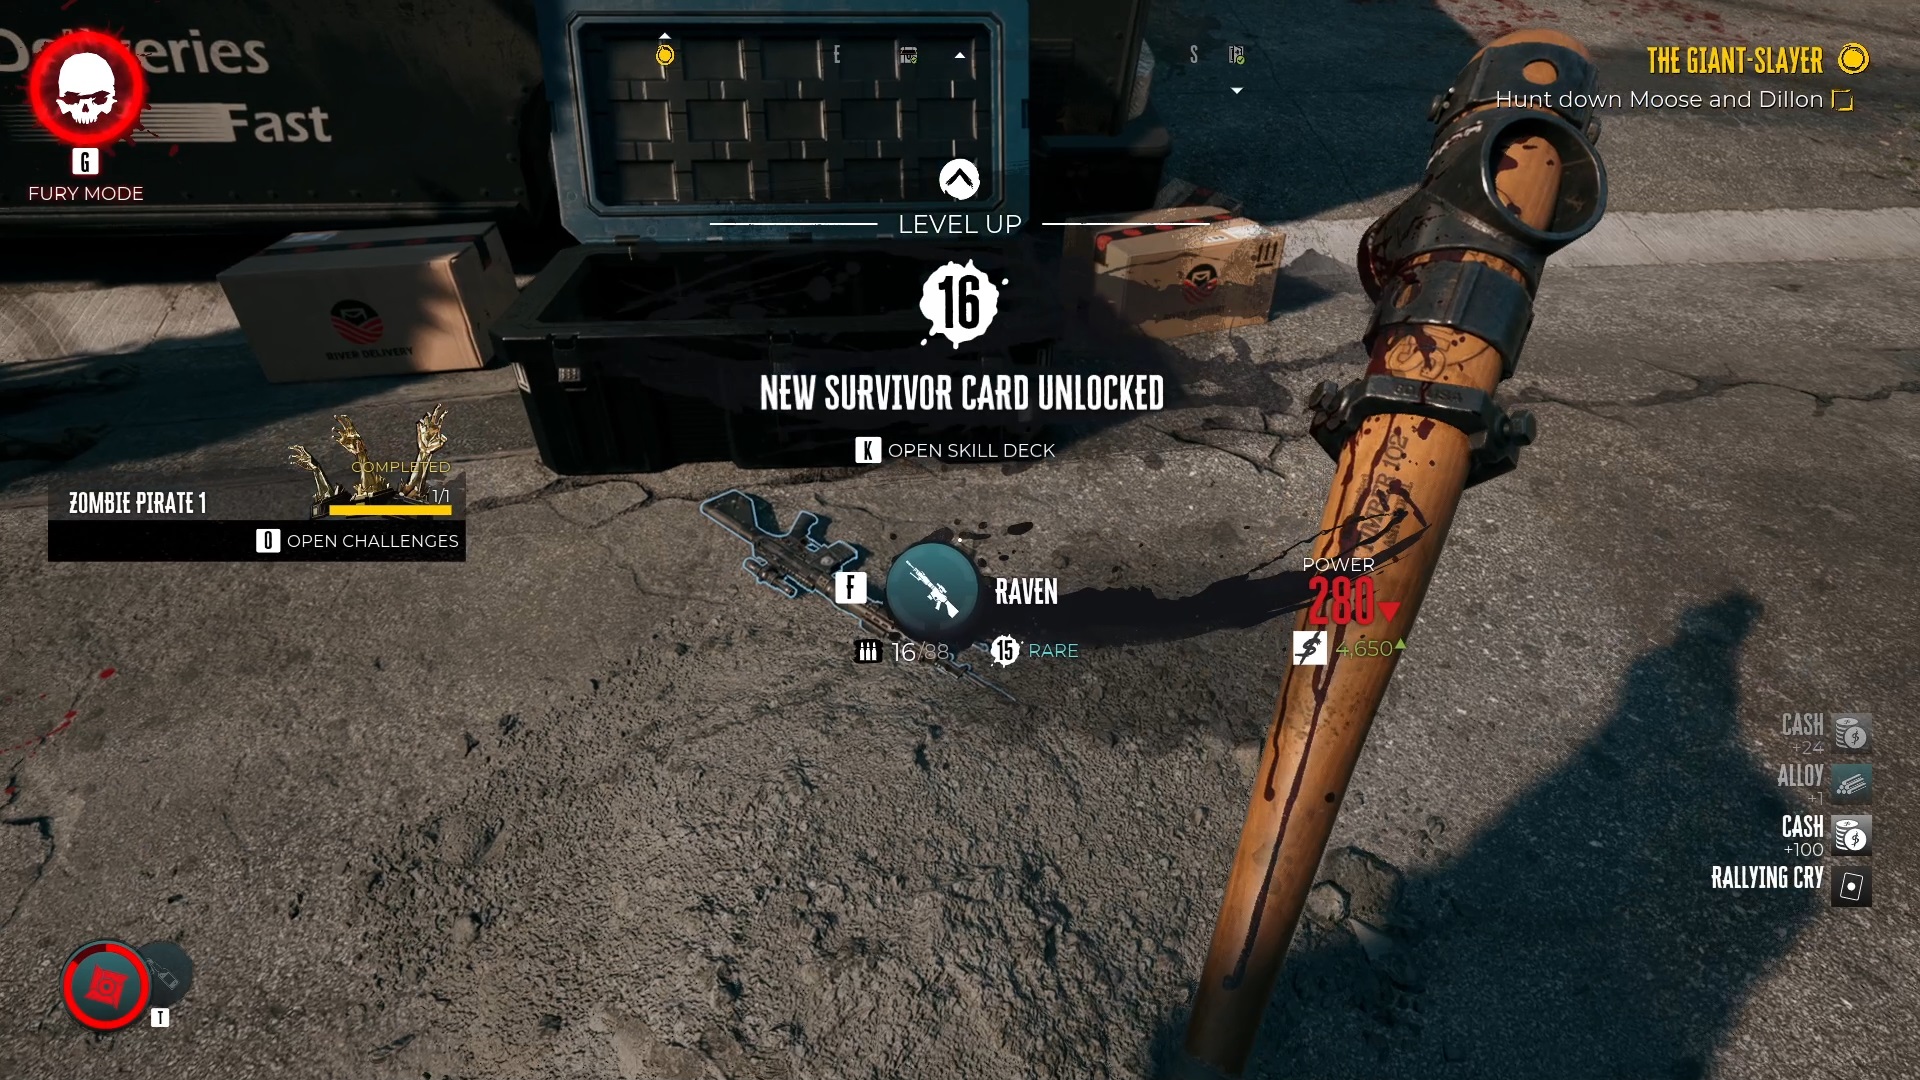 Where to find the Dead Island 2 Mailman keys and open the Special Delivery  chest